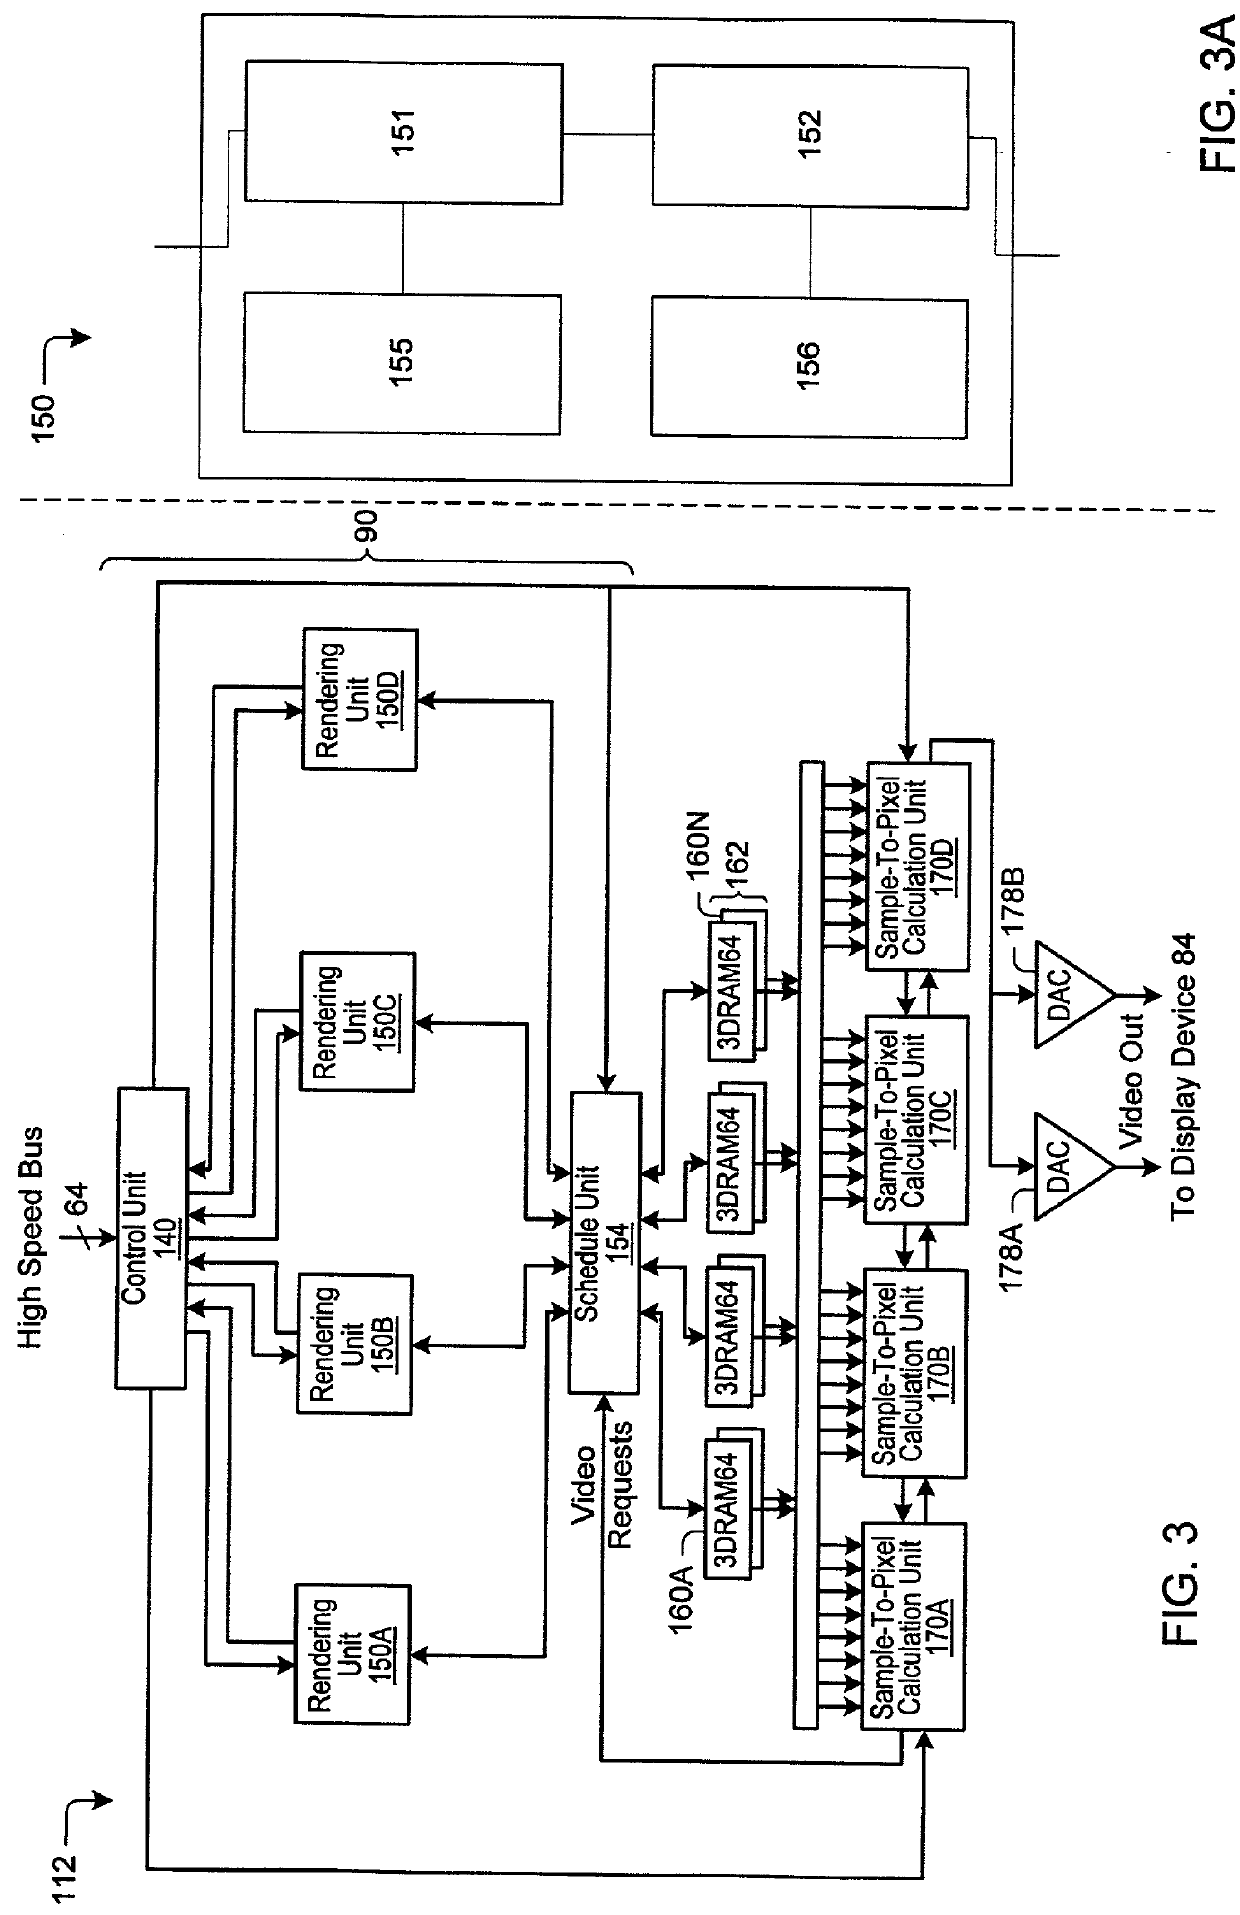 Graphics system configured to filter samples using a variable support filter